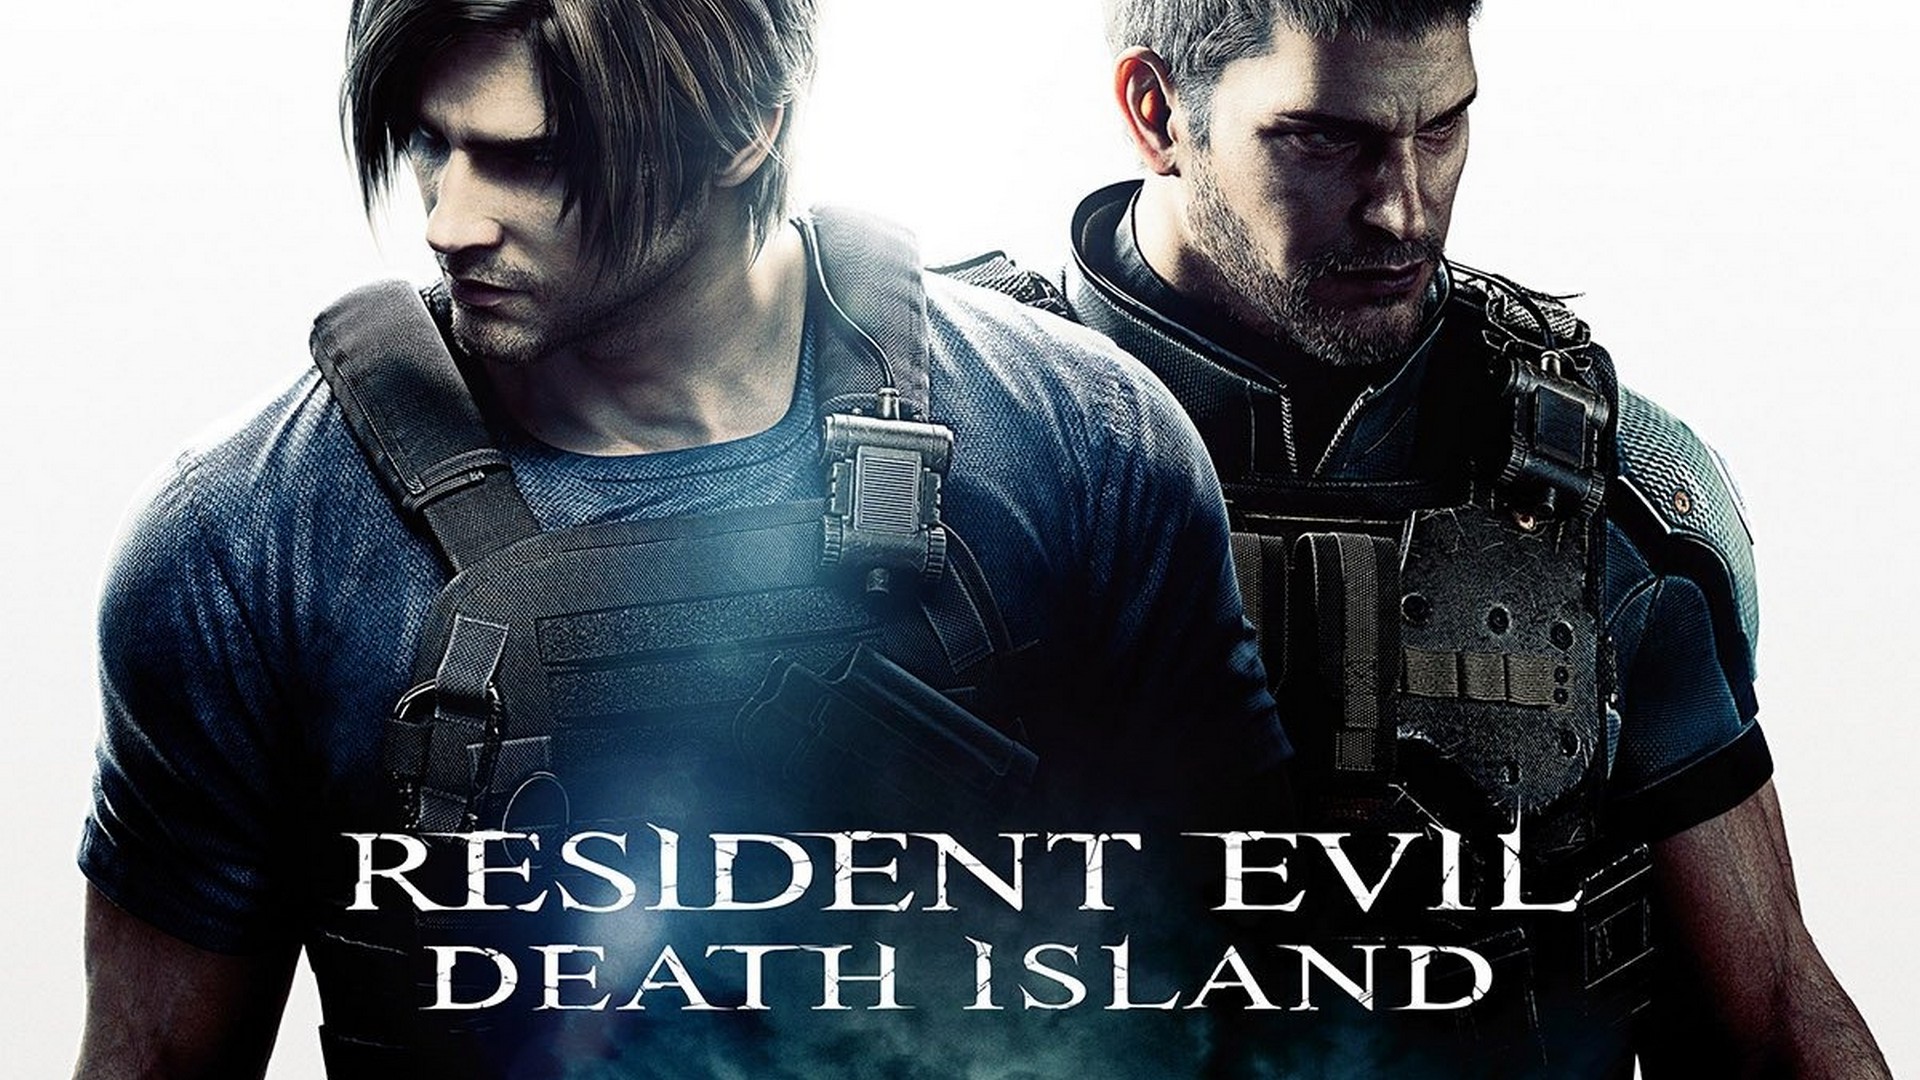 Resident Evil Death Island: A new animated film announced for 2023